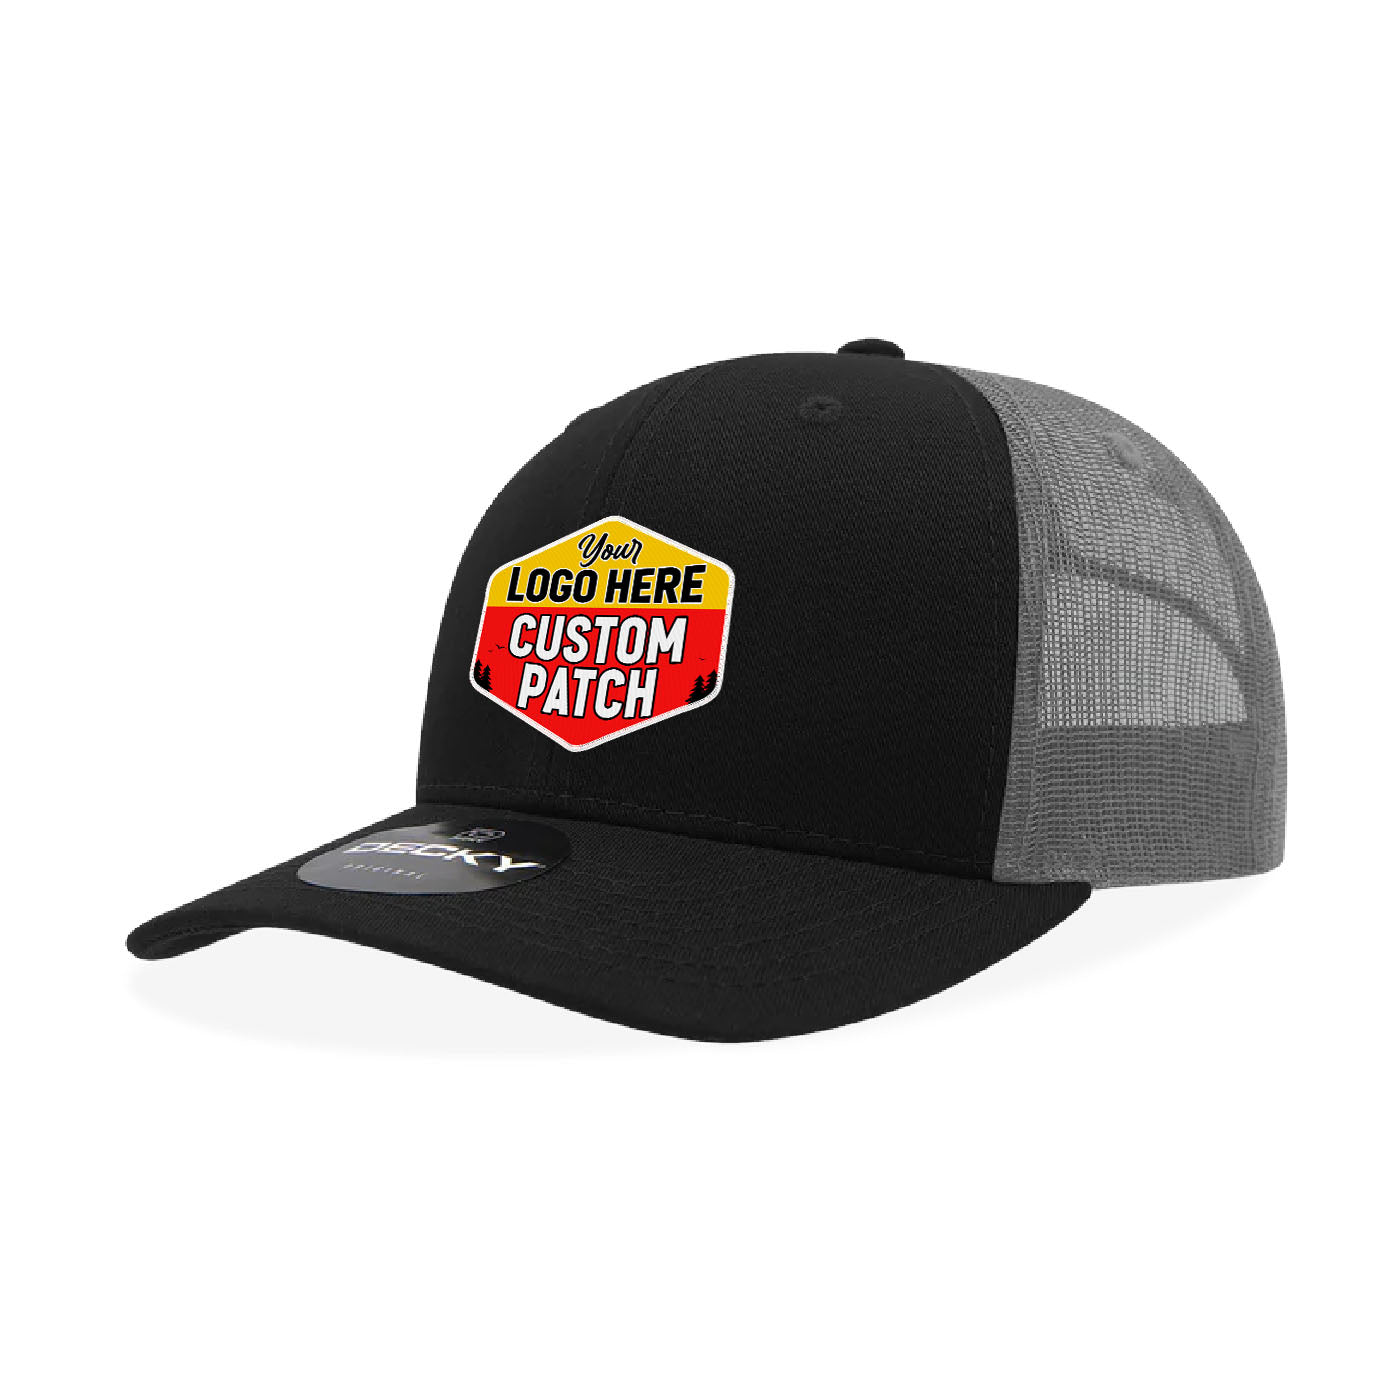 Custom Patch Decky 5019 - Youth 6 Panel Mid Profile Structured Cotton Trucker, Kids Classic Trucker Hat